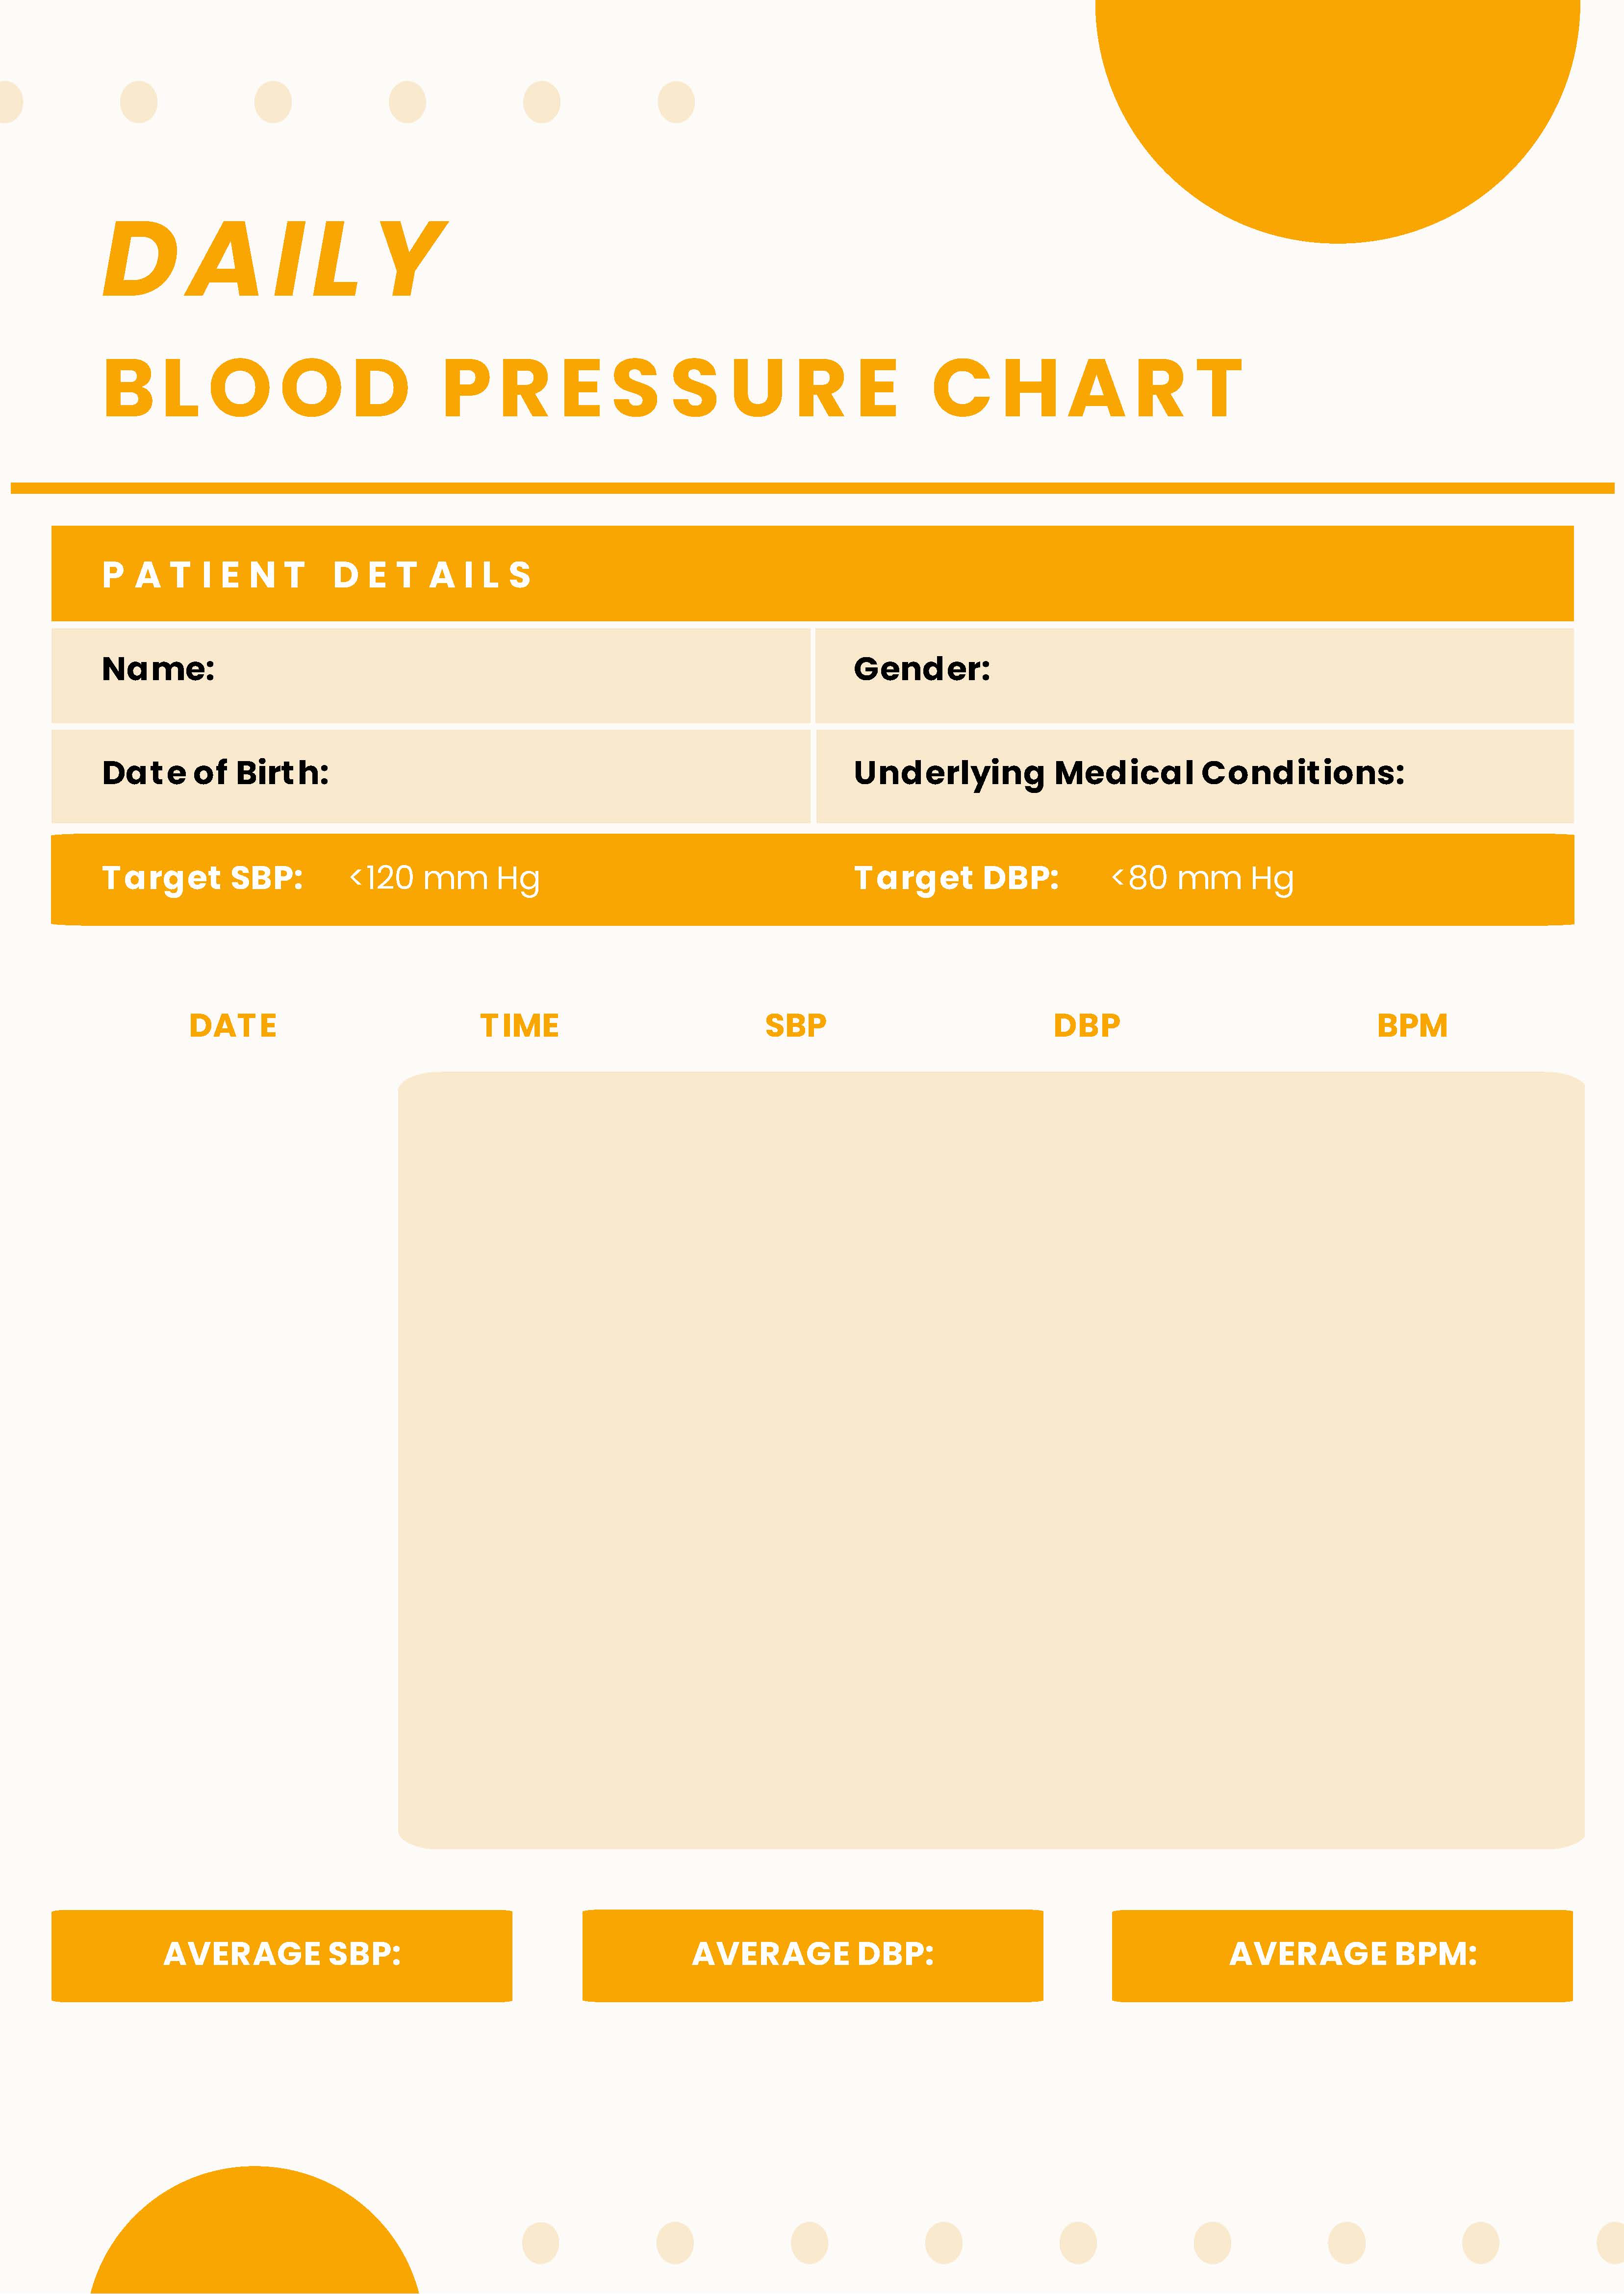 Daily Blood Pressure Chart